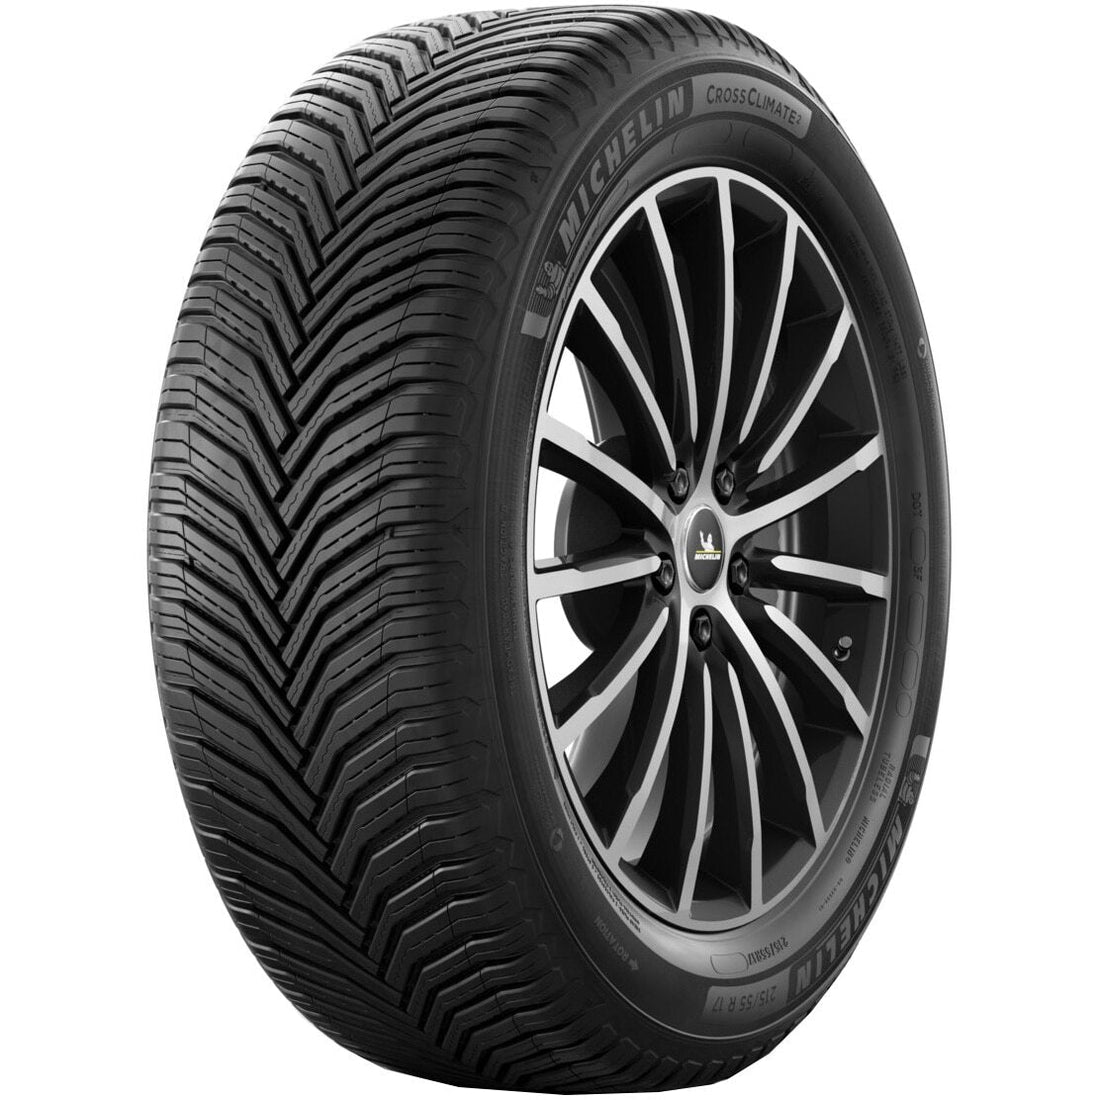 Anvelope All-season Michelin Crossclimate 2 235/55R17 103 Y Anvelux